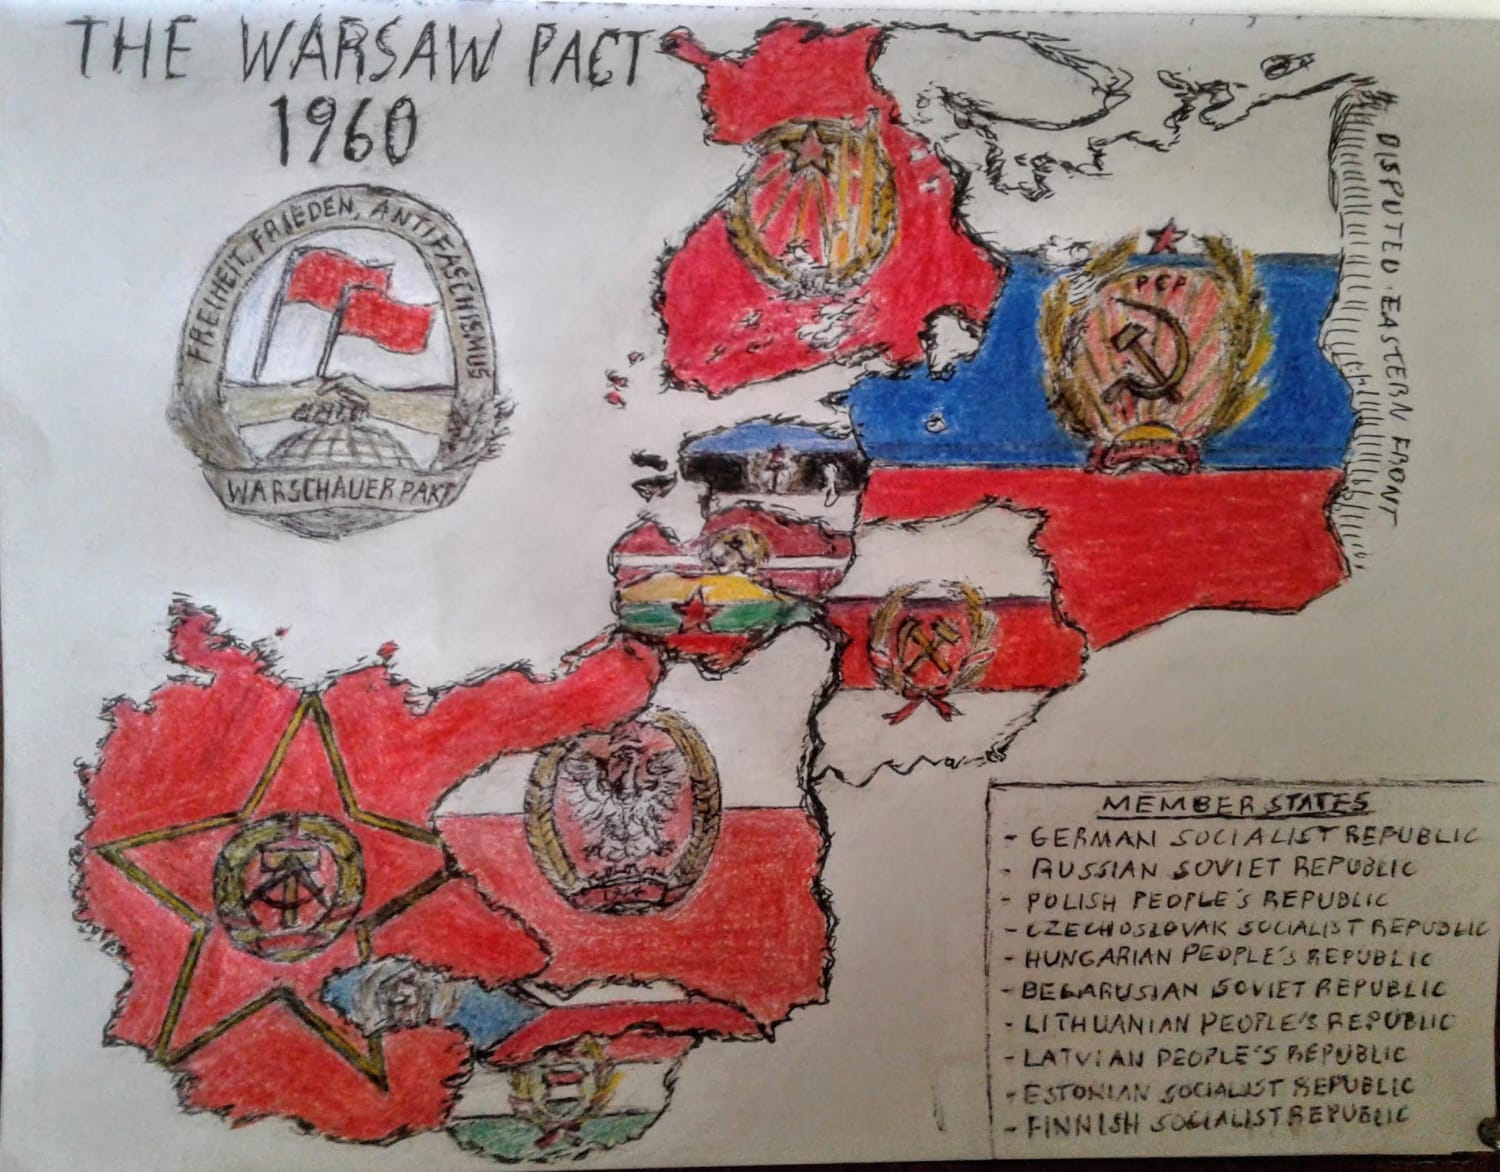 Reverse WWII, the postwar world: the Warsaw Pact